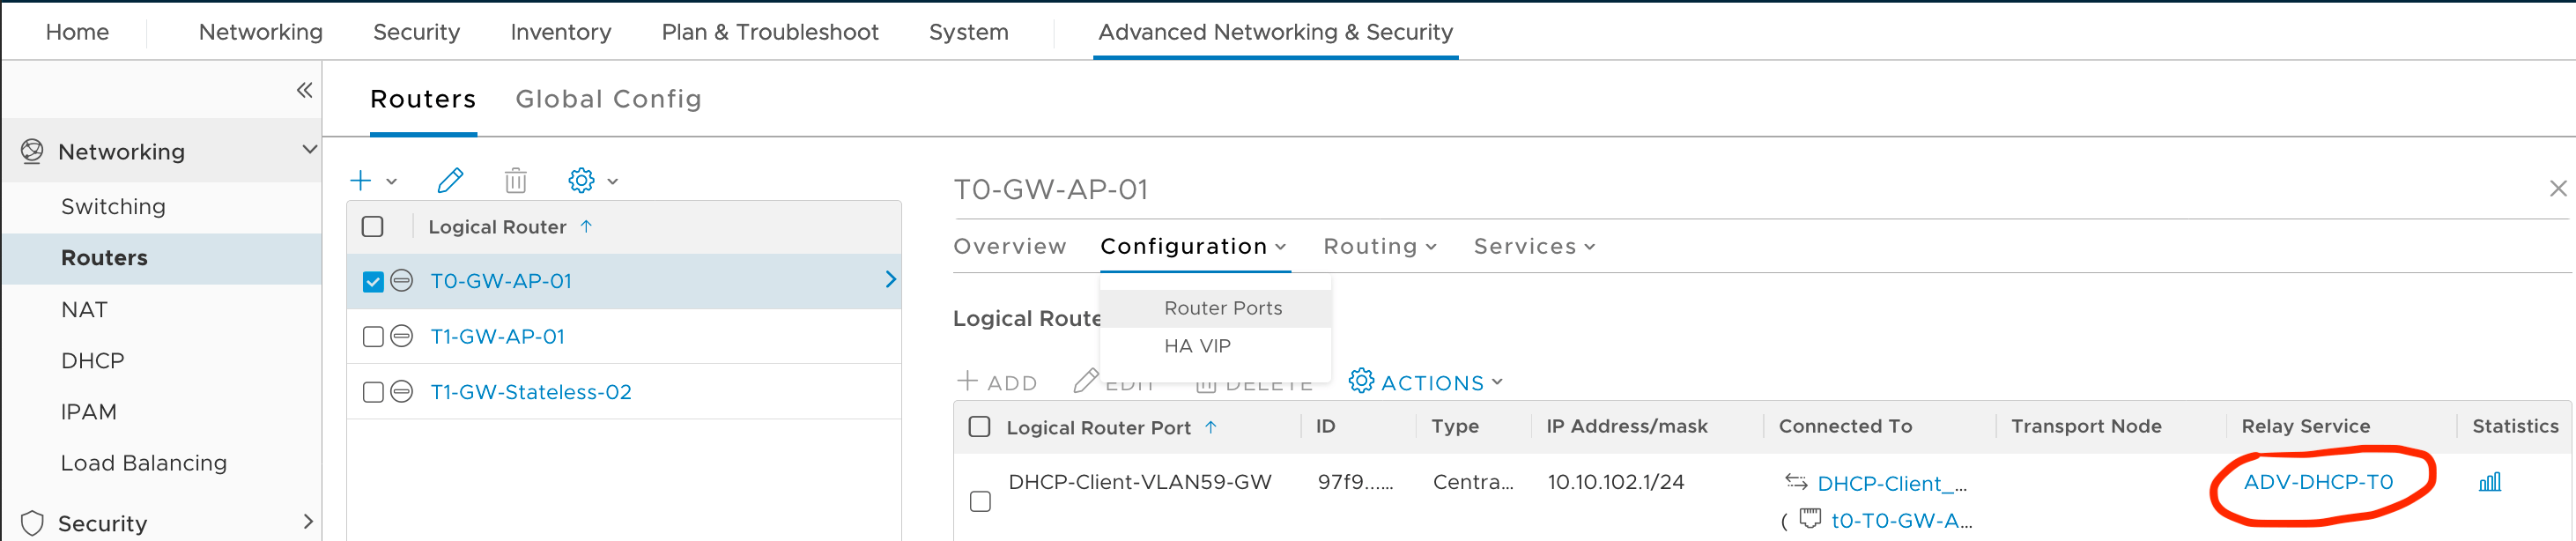 Router Port UI view